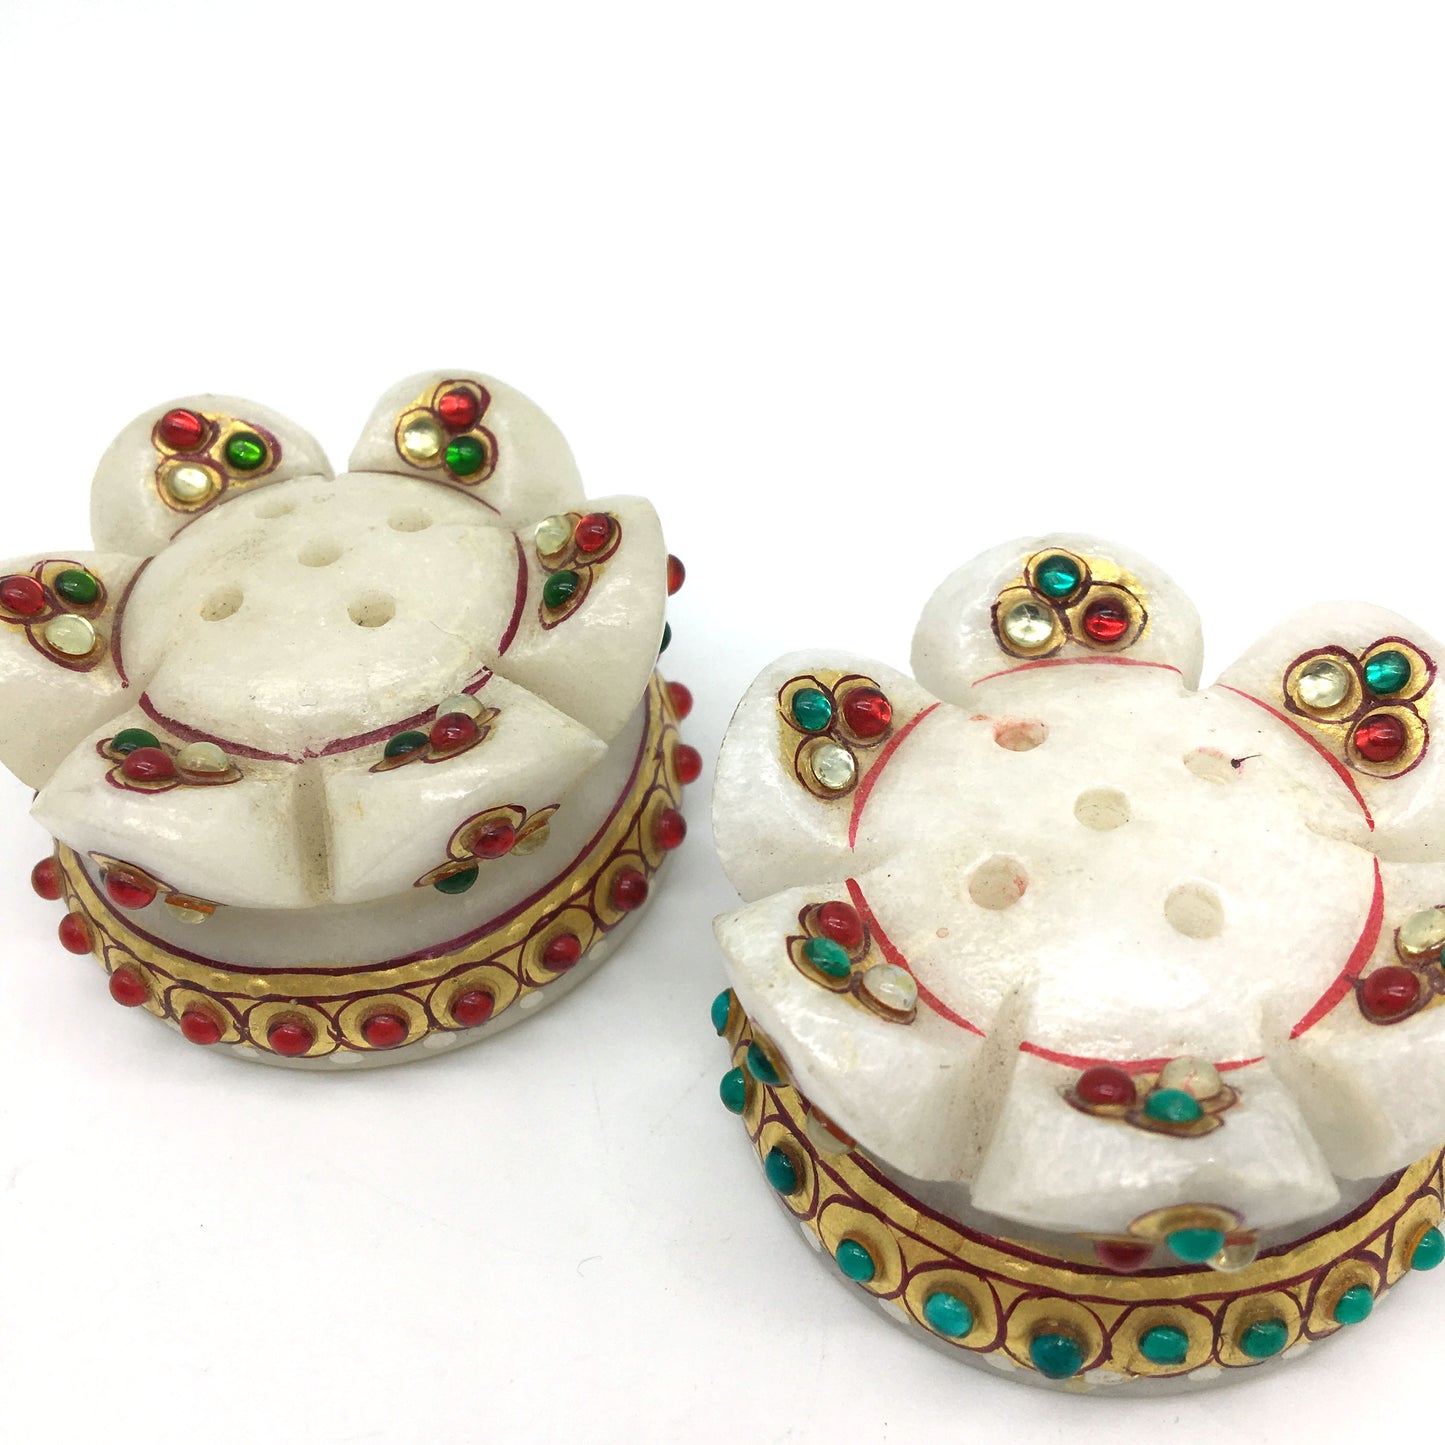 2-Handcrafted India Marble Flower Shaped Decorative Stick Incense Burners